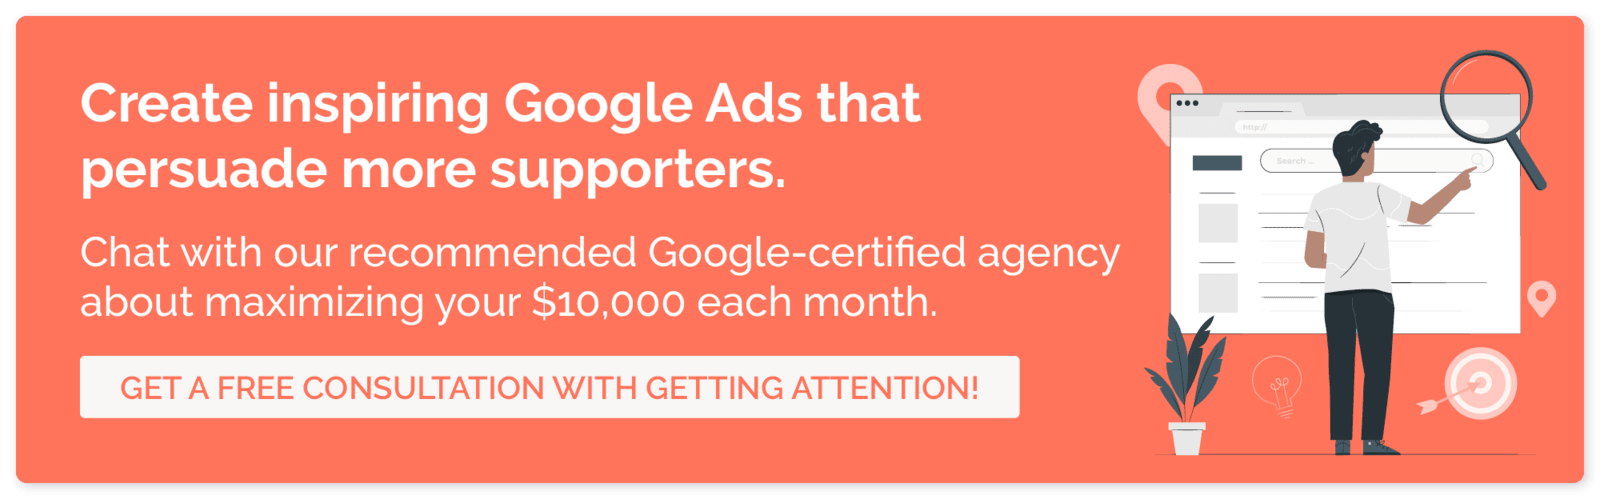 To leverage one of the best nonprofit marketing ideas, work with the Google Ad Grant experts at Getting Attention.